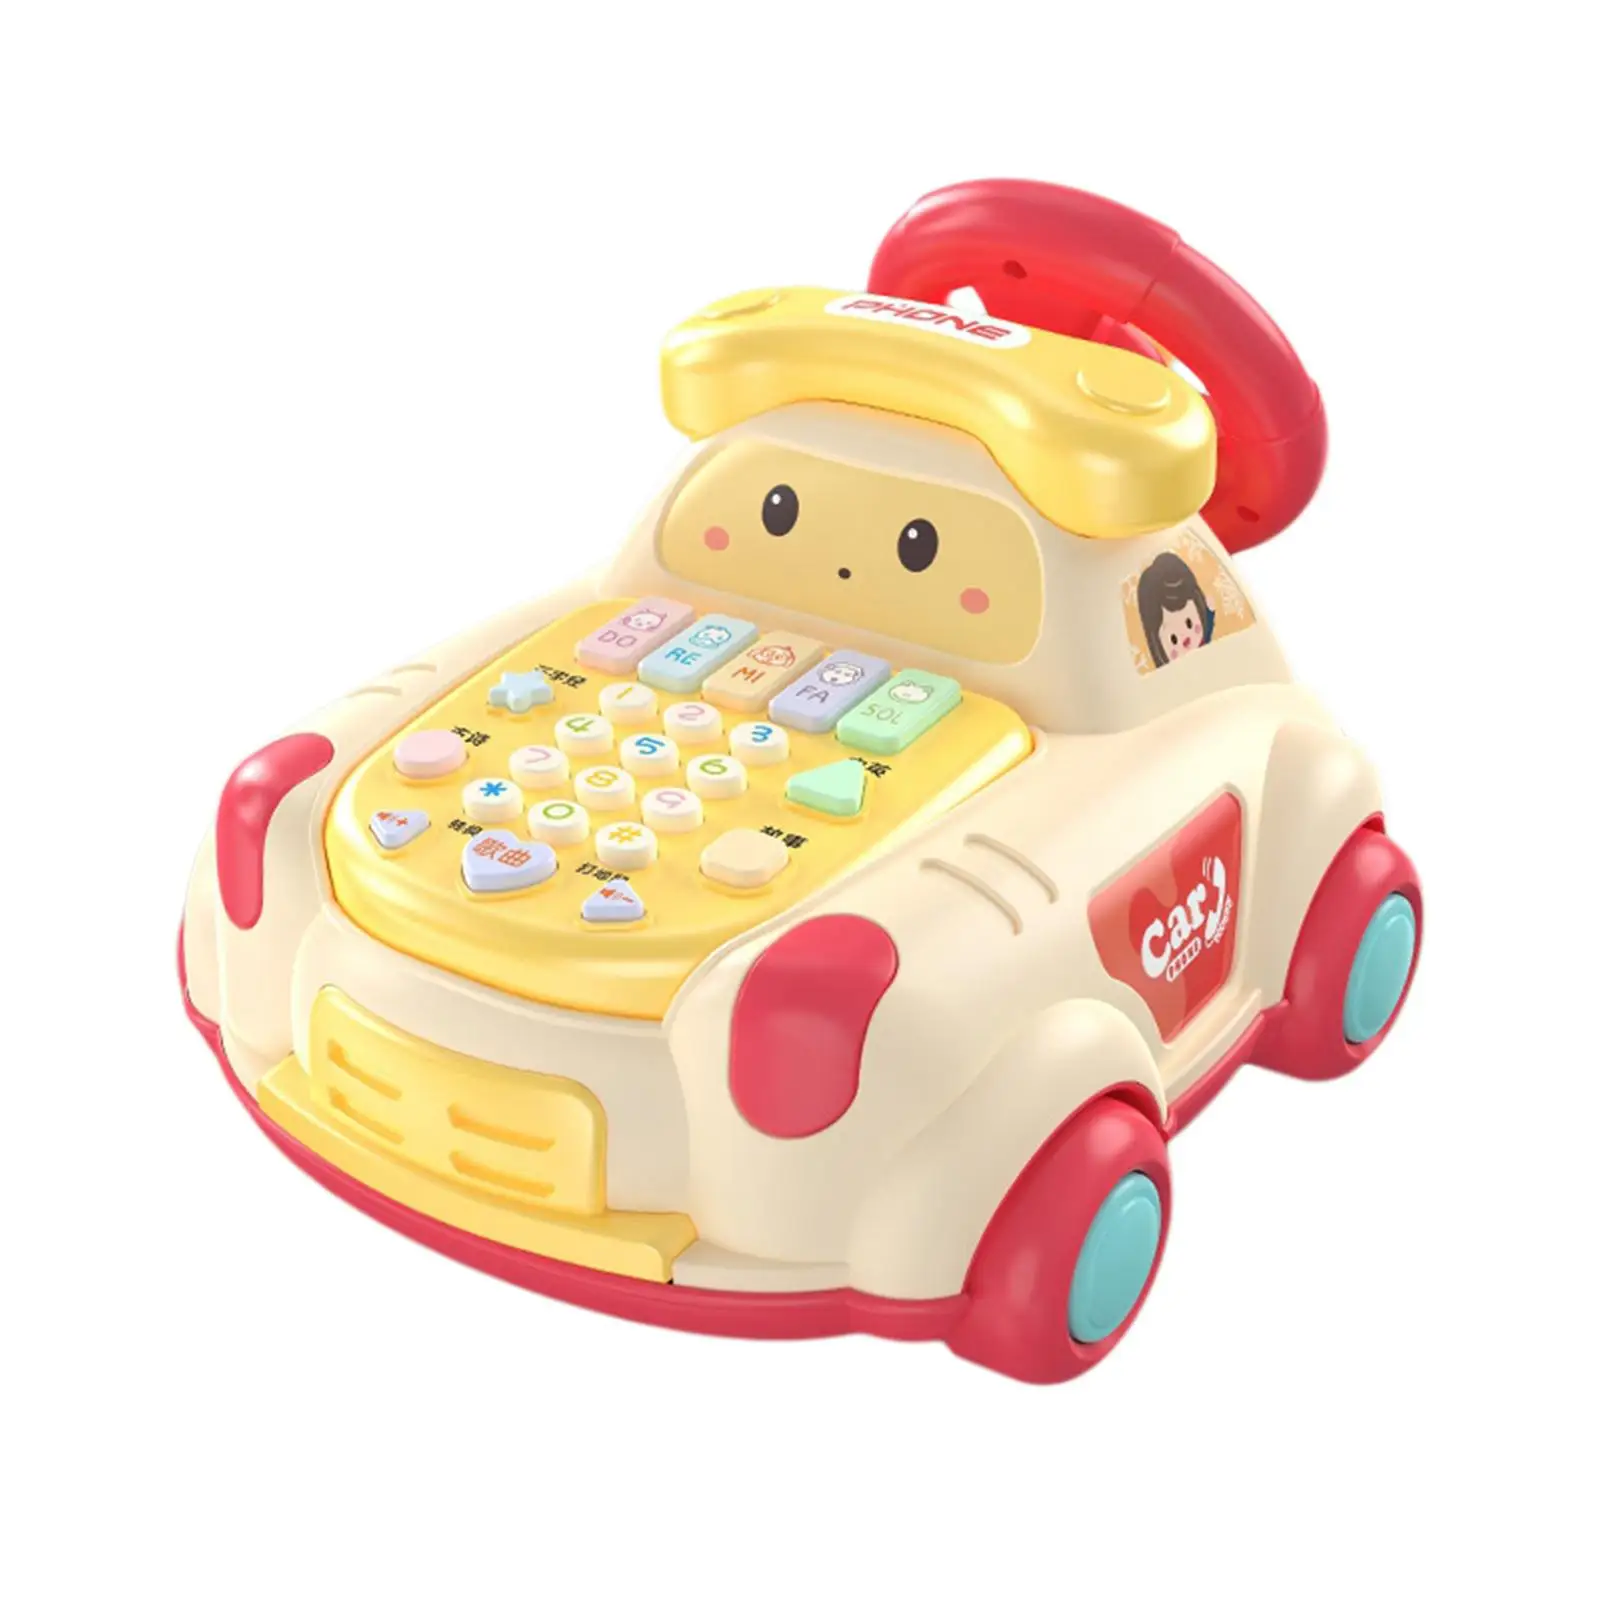 Baby Musical Toys Car musical Educational Pretend Play Music Light Phone Toy for Activity Interaction Education Preschool